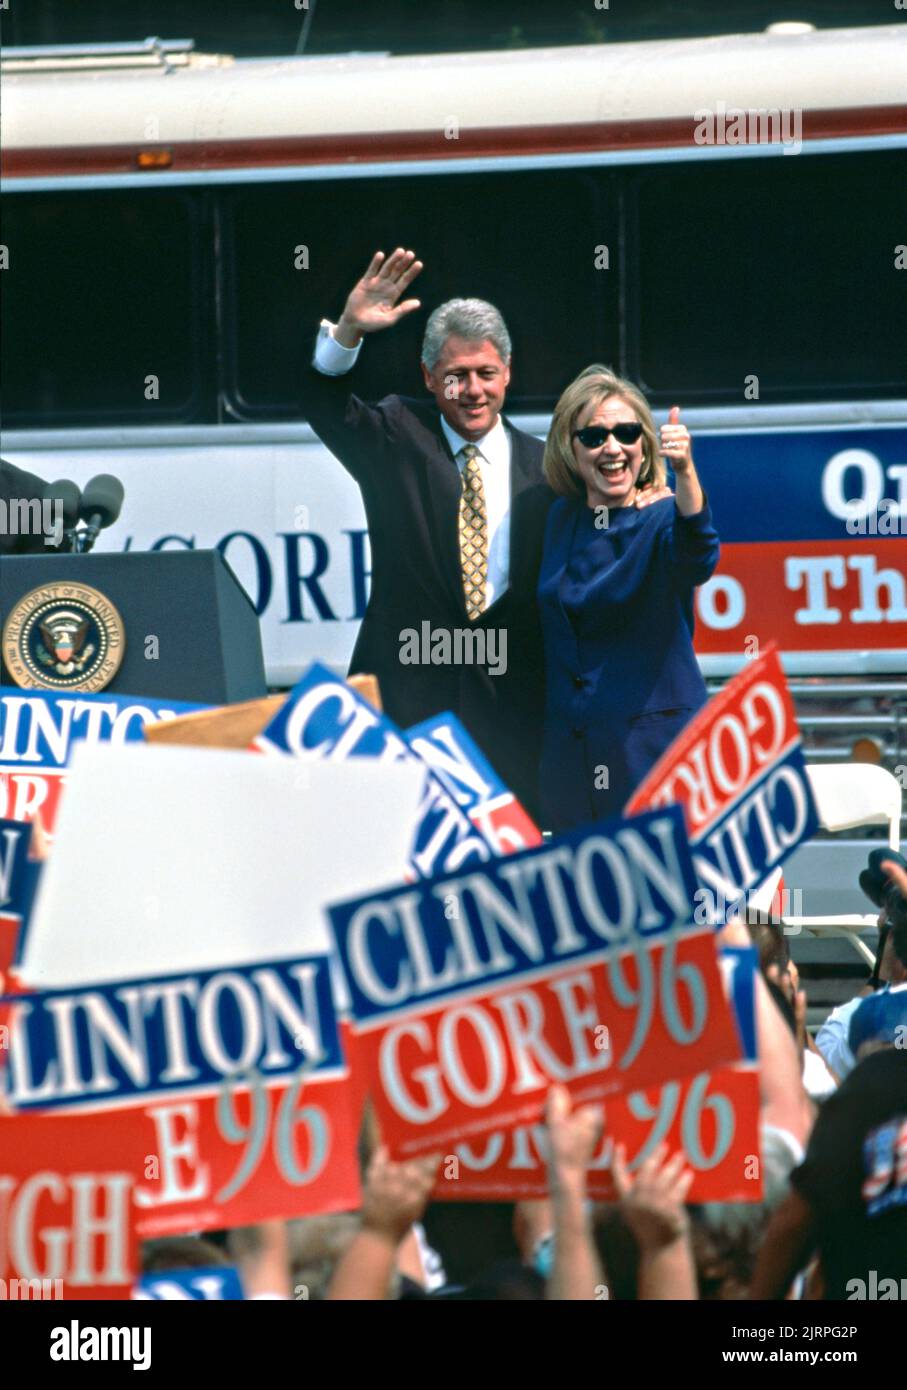 U.S. President Bill Clinton and First Lady Hillary Clinton wave to crowds of supporters during a campaign rally, August 30, 1996 in Cape Girardeau, Missouri. Clinton stopped in the Mississippi River community on his campaign bus tour named the bridge to the 21st century. Stock Photo